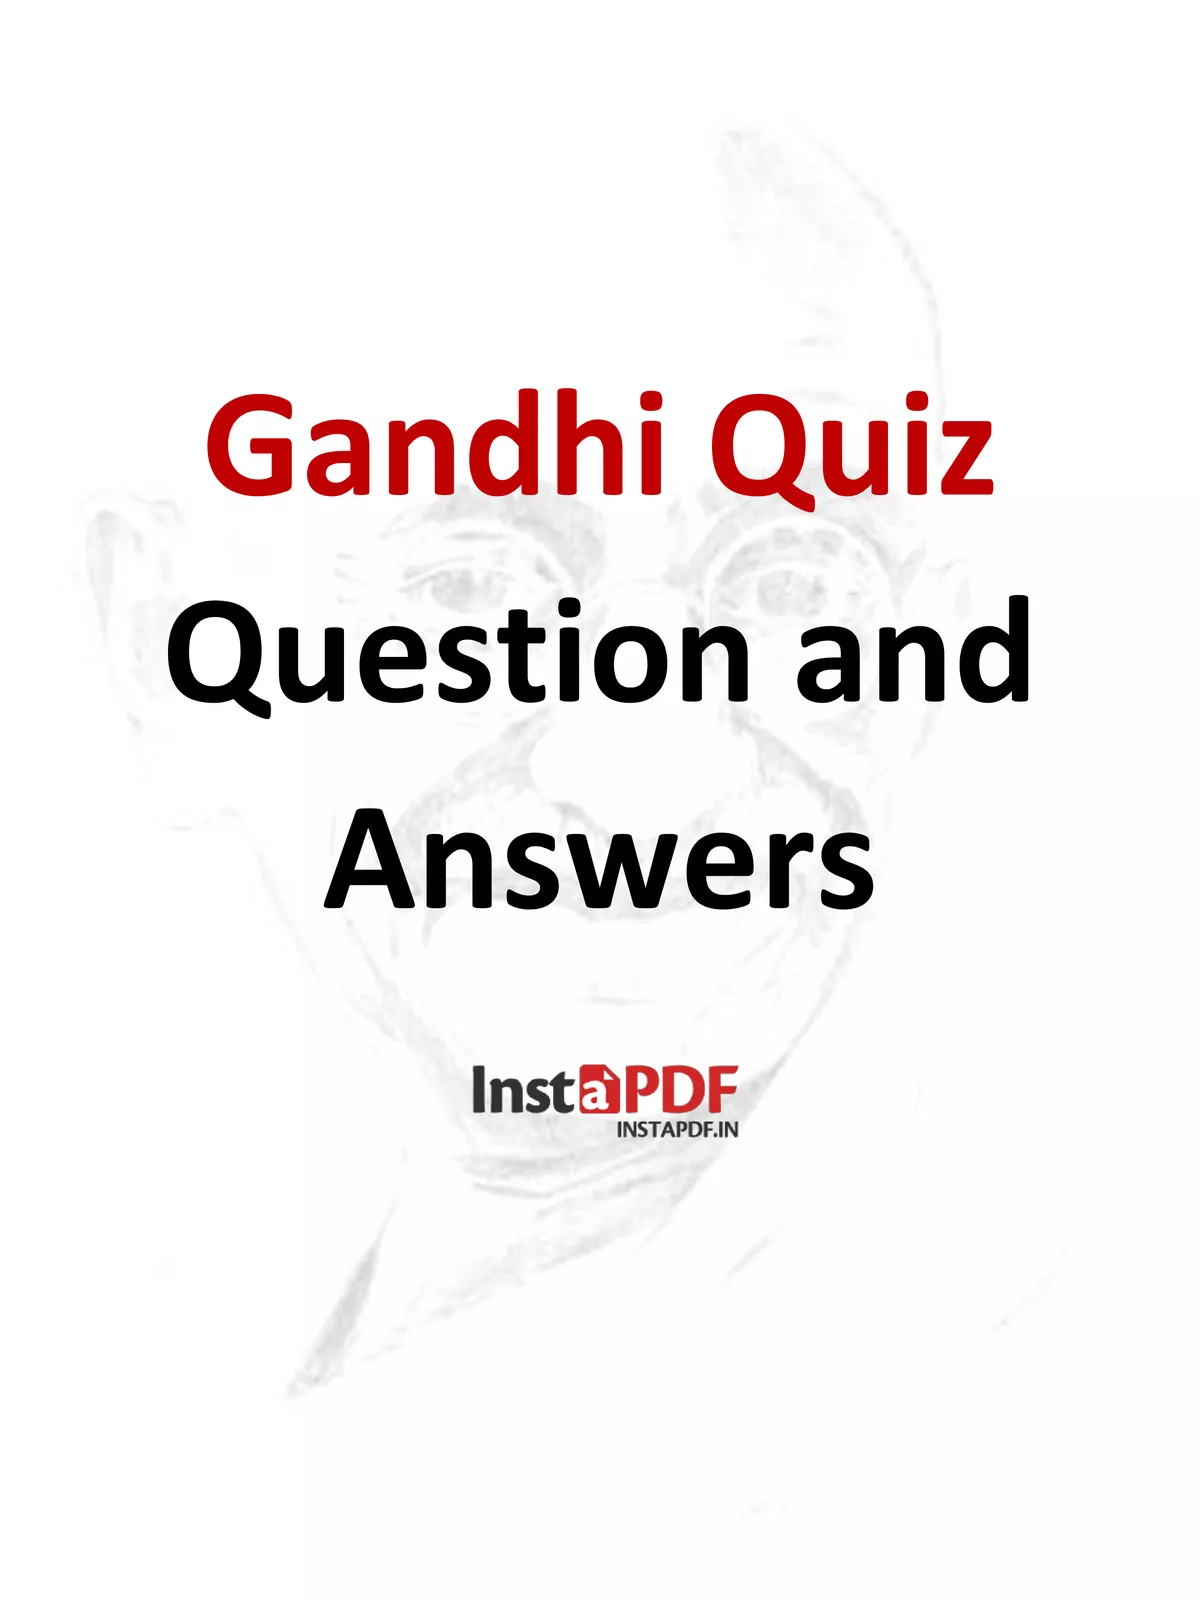 Gandhi Jayanti Quiz Questions and Answers